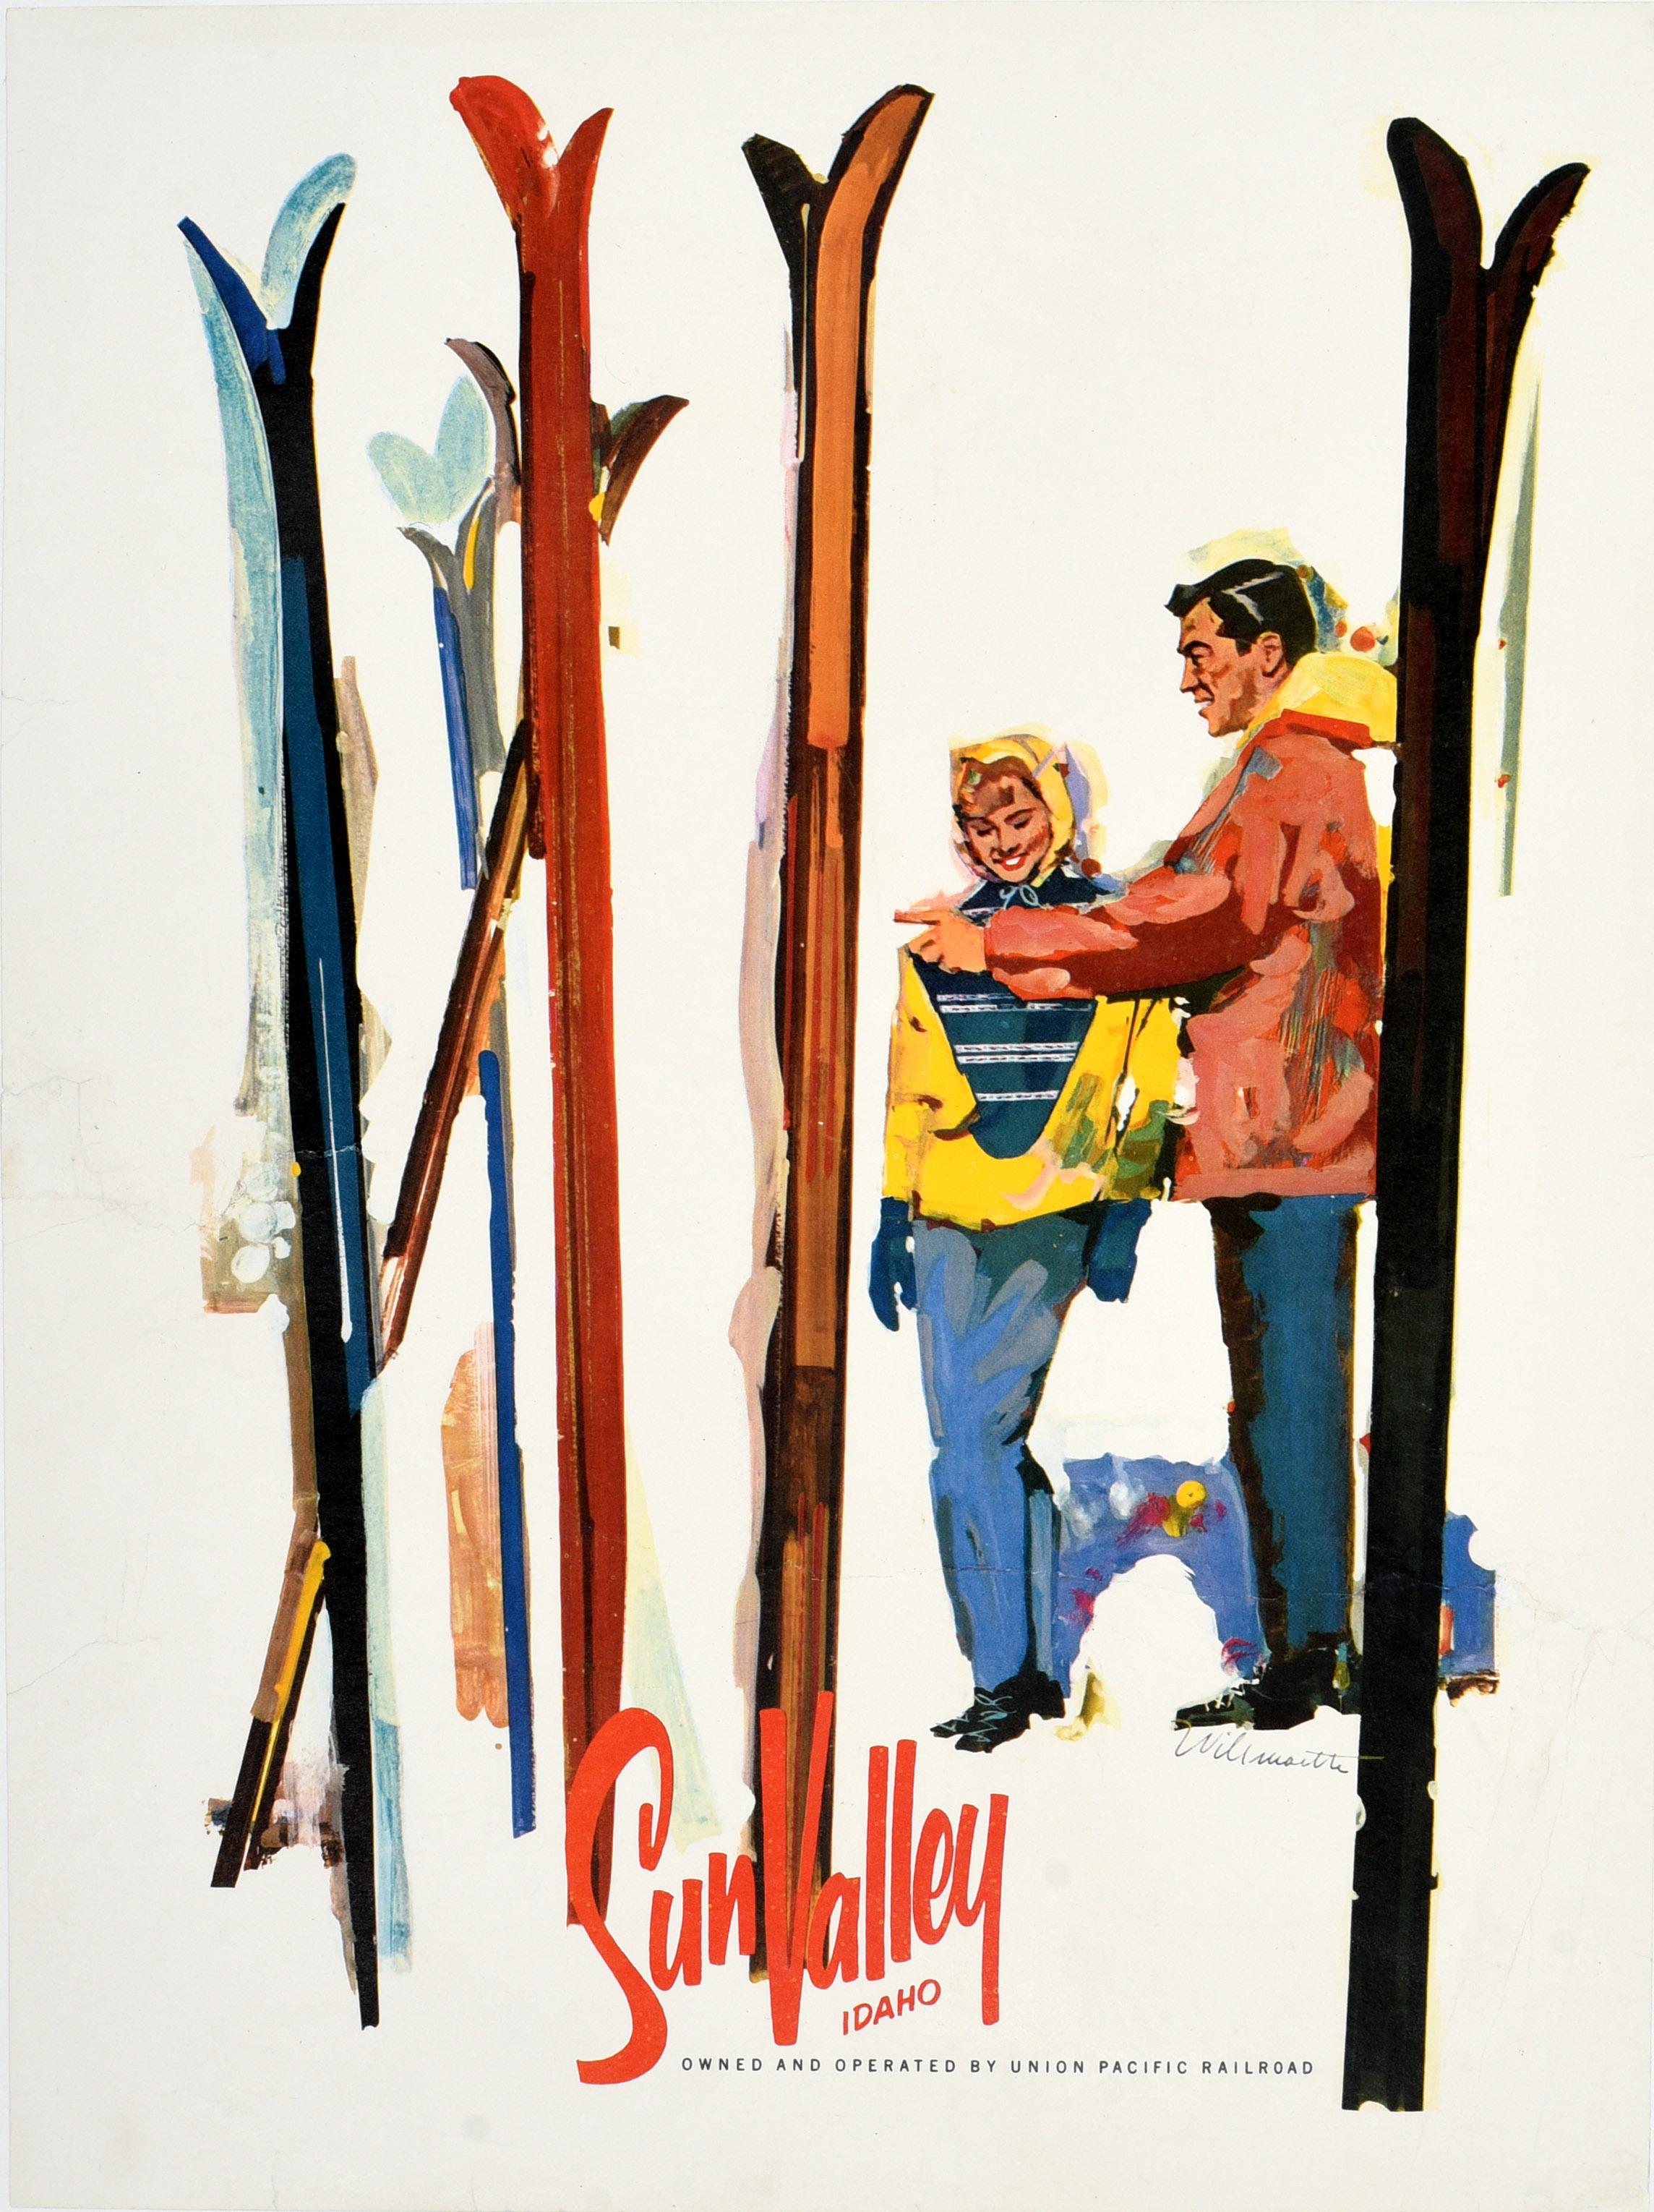 Original vintage winter sport travel poster advertising the Sun Valley ski resort in Idaho Owned and operated by Union Pacific Railroad (1936-1964). Colourful artwork by the American artist William Willmarth (1898-1984) depicting a fashionable young